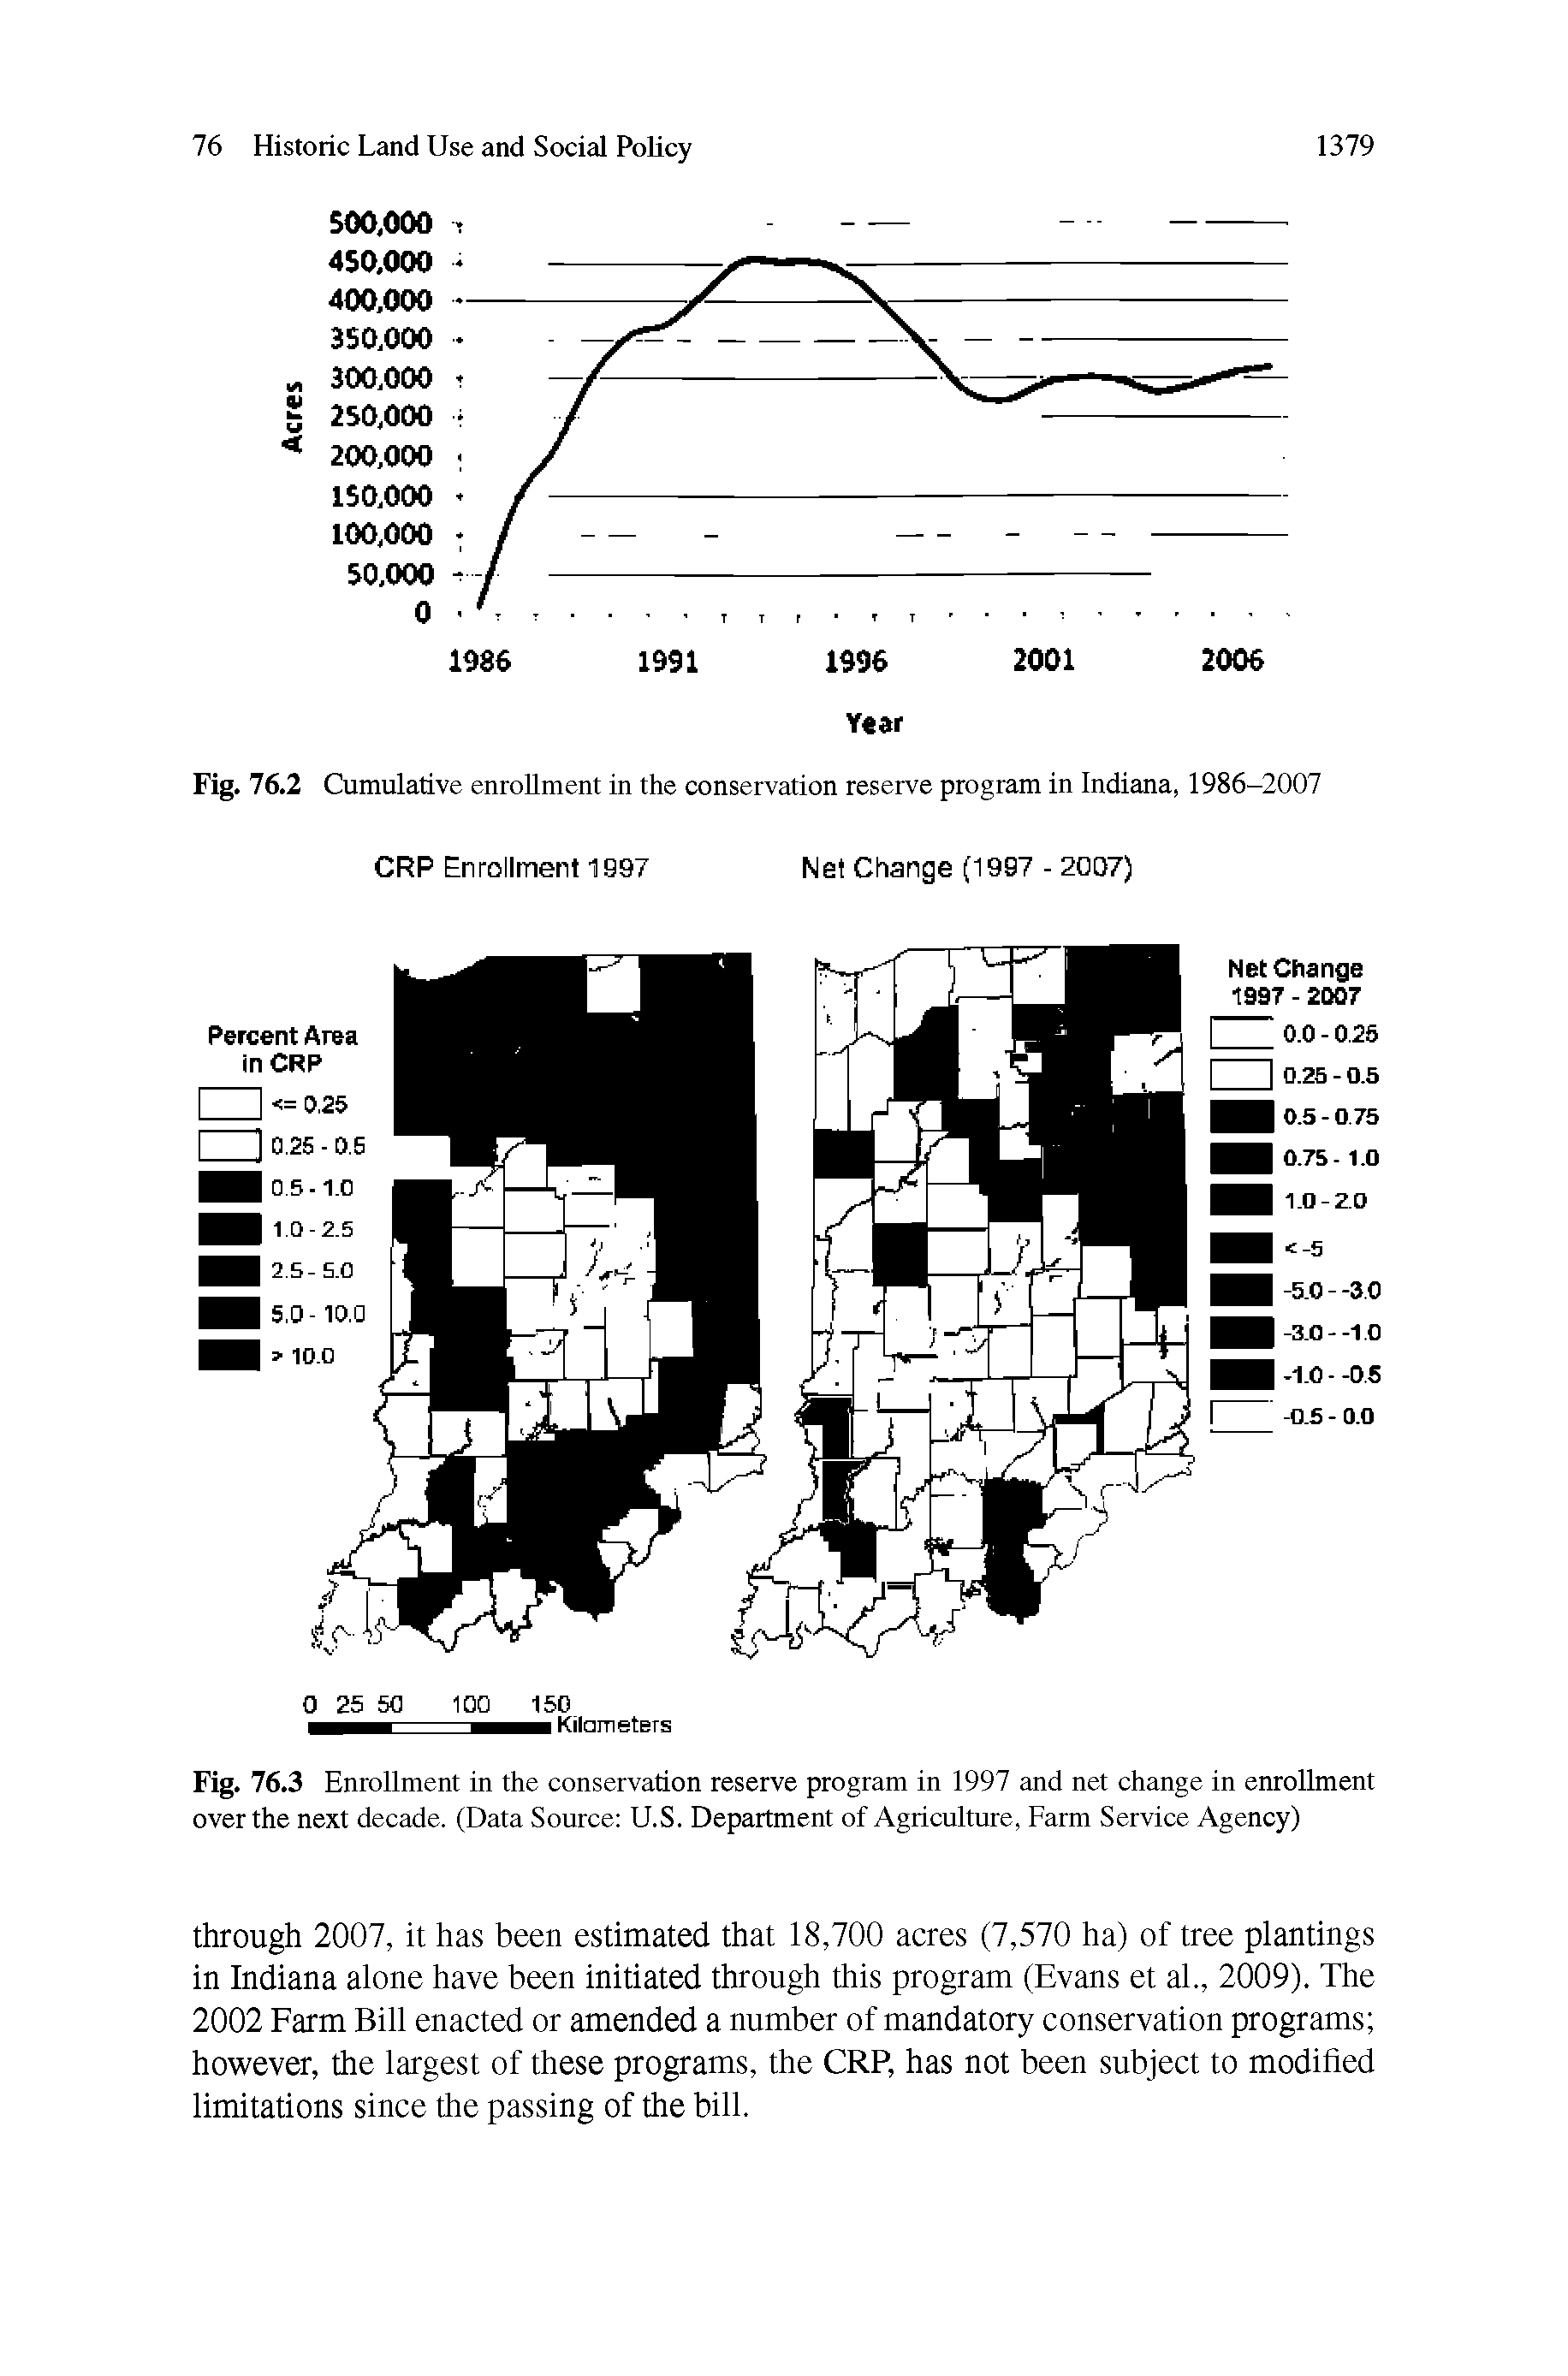 Fig. 76.3 Enrollment in the conservation reserve program in 1997 and net change in enrollment over the next decade. (Data Source U.S. Department of Agriculture, Farm Service Agency)...